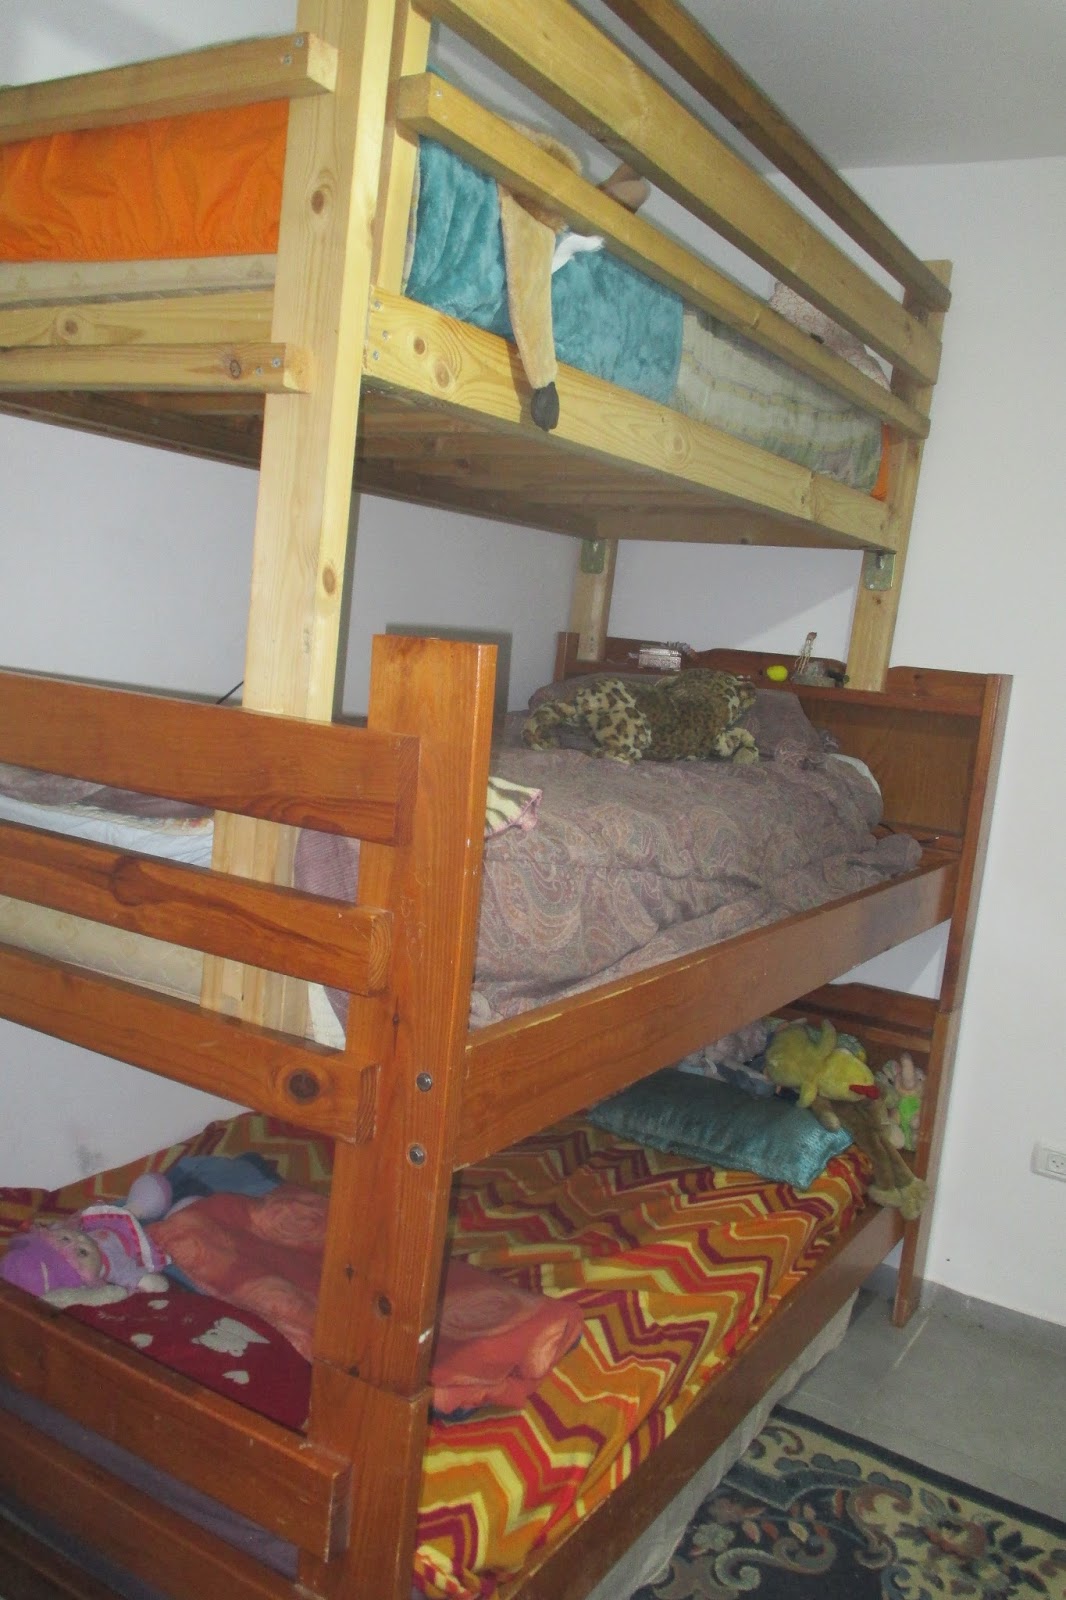 Upcycled Quadruple Bunk Bed, Building Bunk Beds For Charity